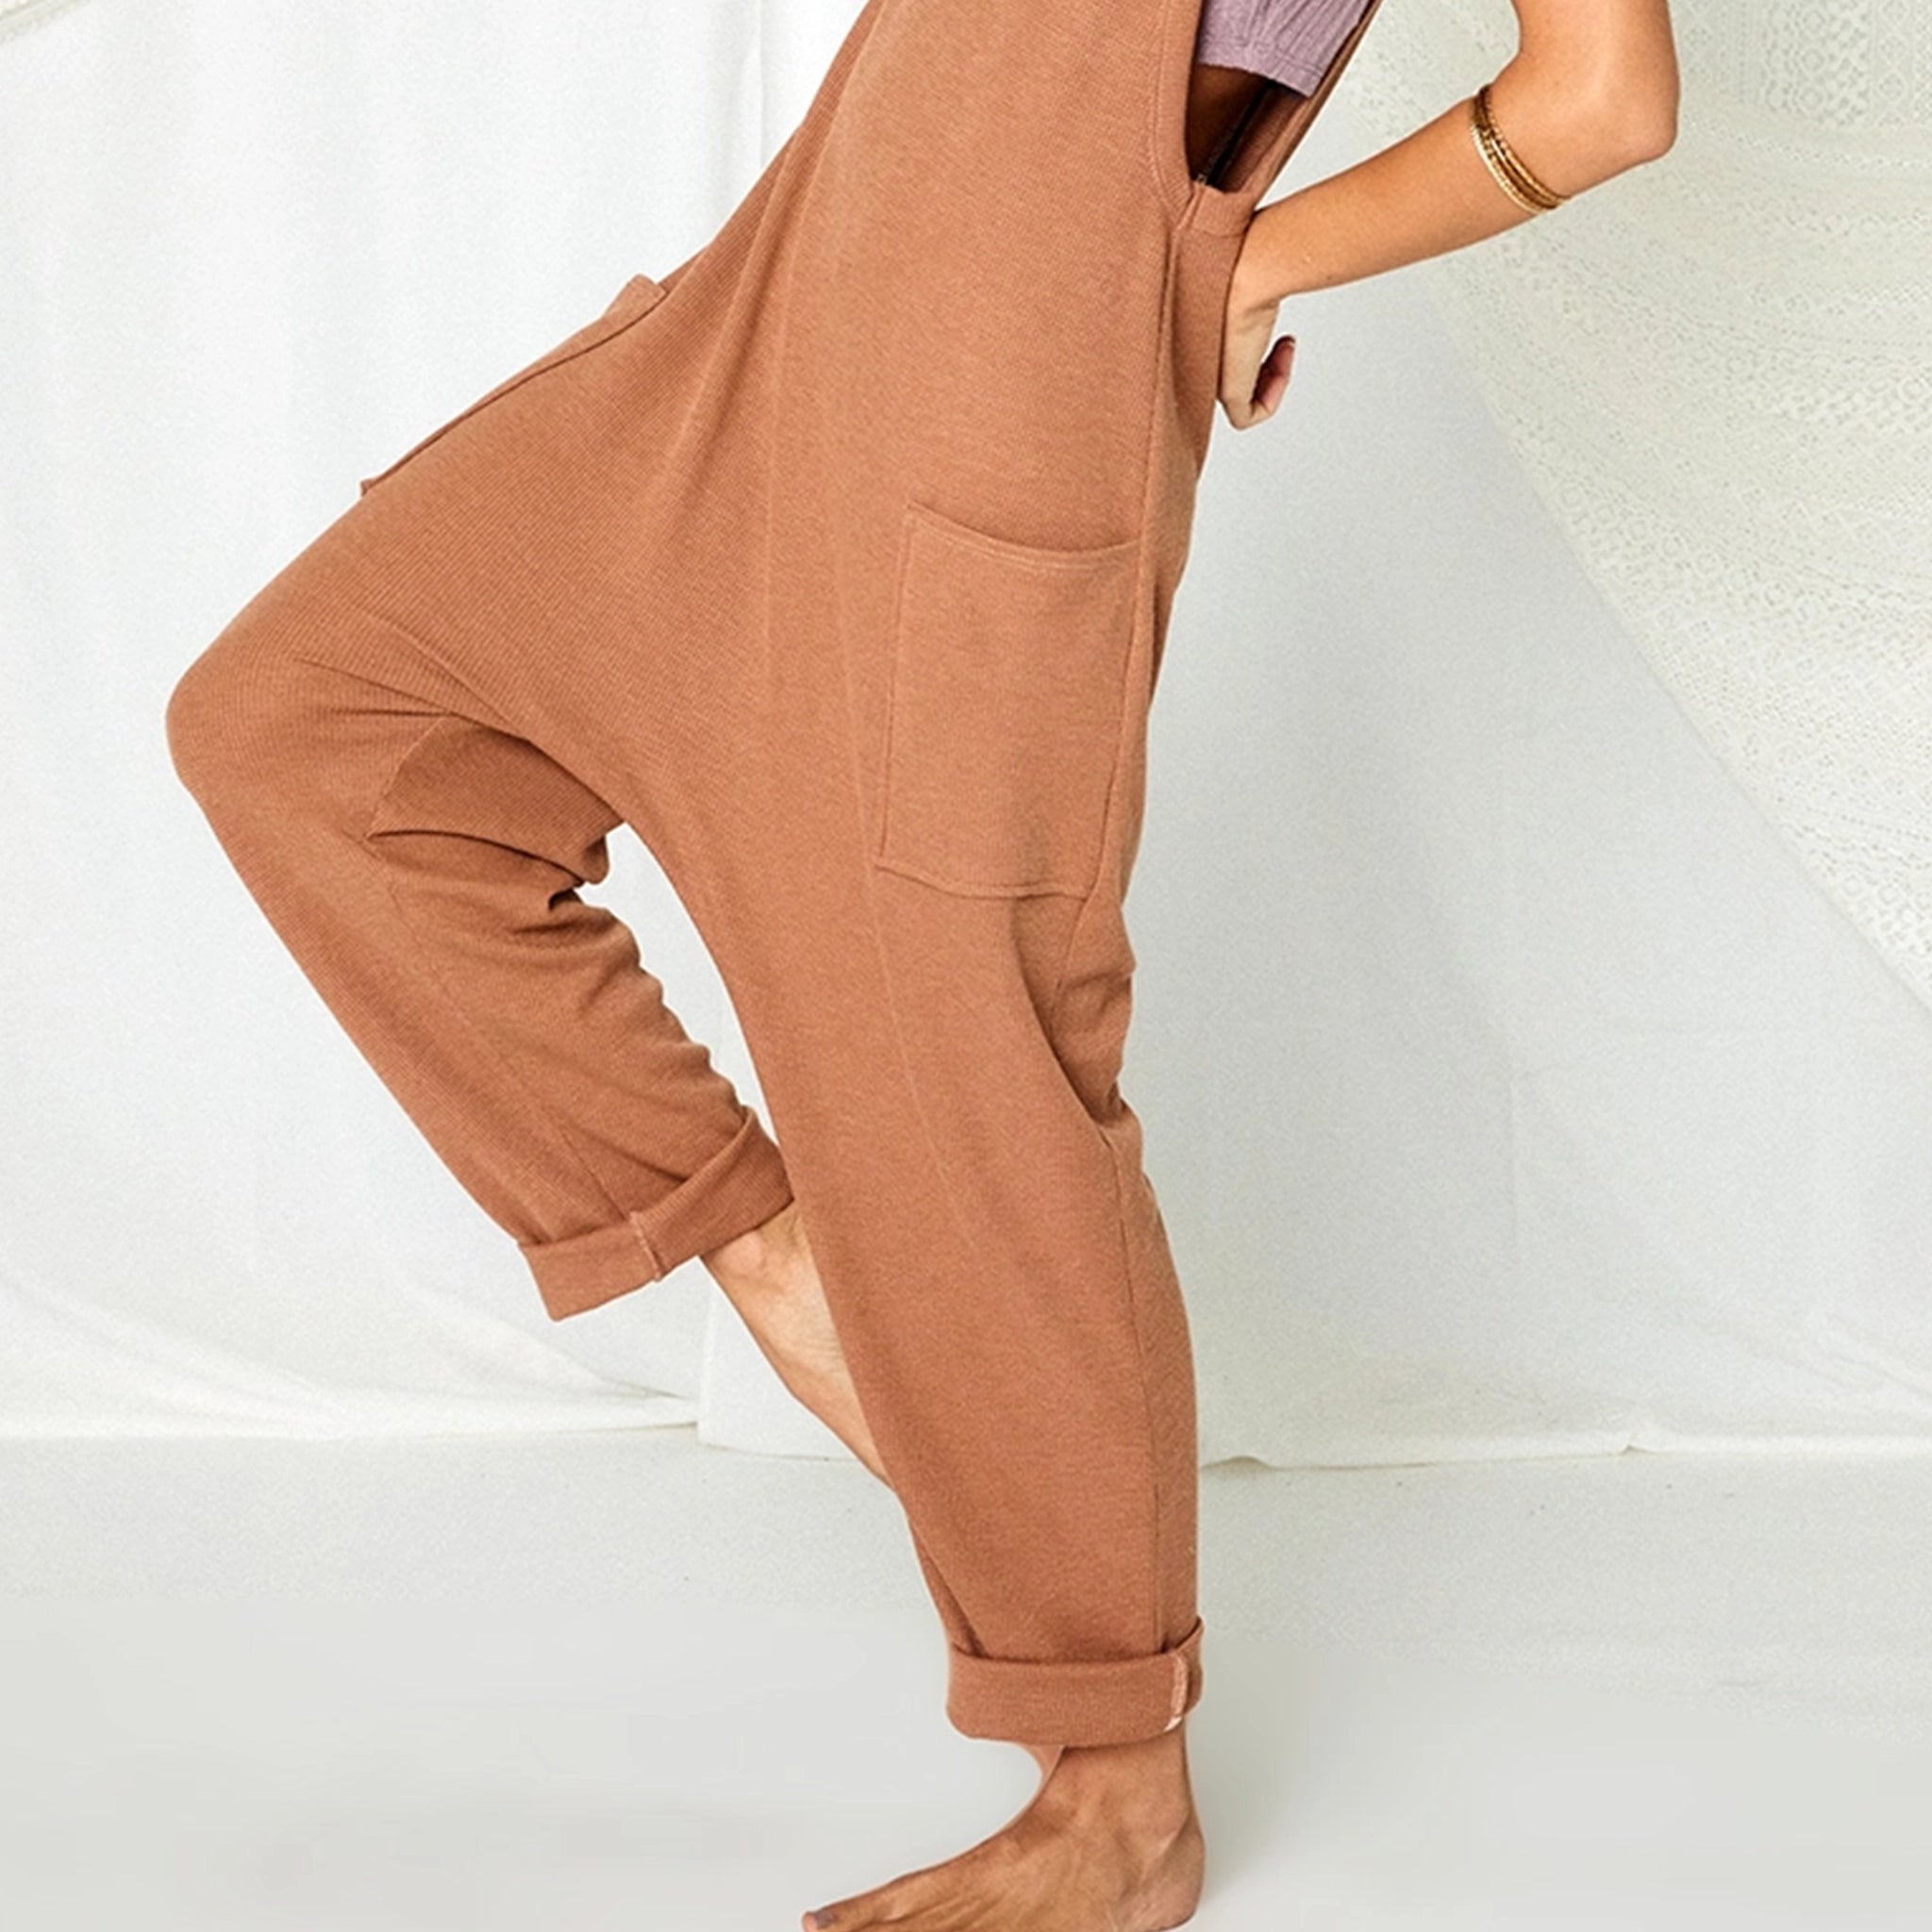 On a white background is a model wearing a camel colored jumpsuit with a drop crotch, front pockets and a v-neck.